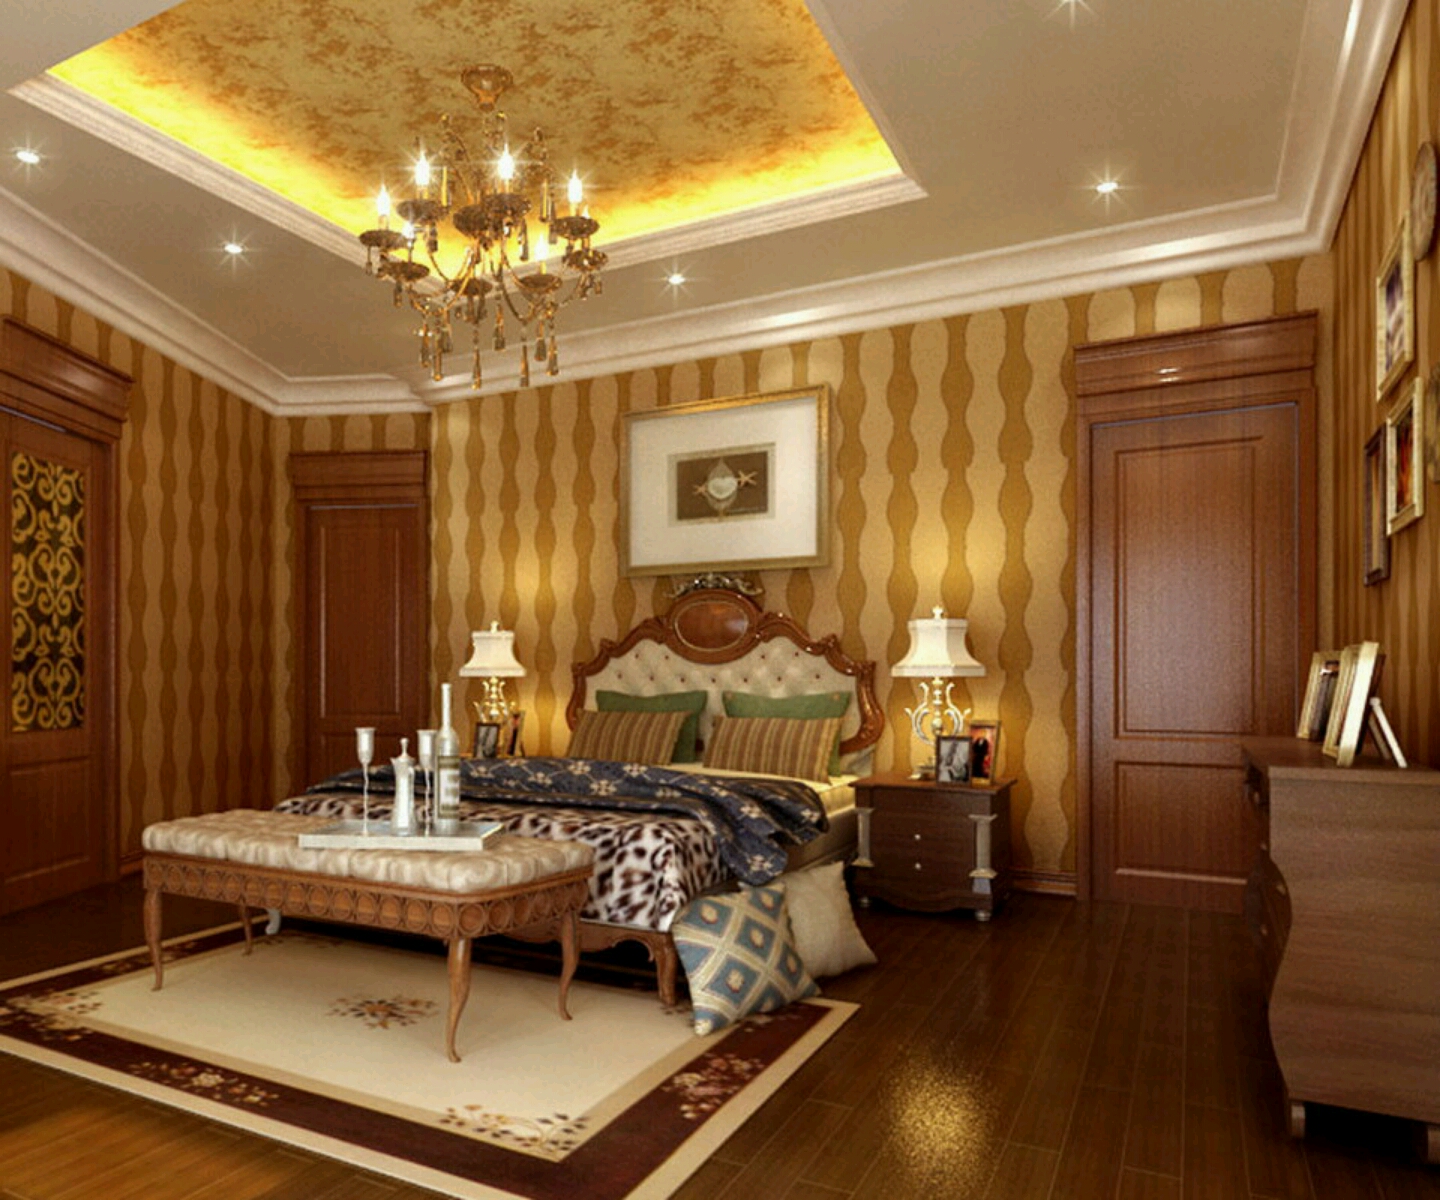  home designs latest.: Modern bedrooms designs ceiling designs ideas